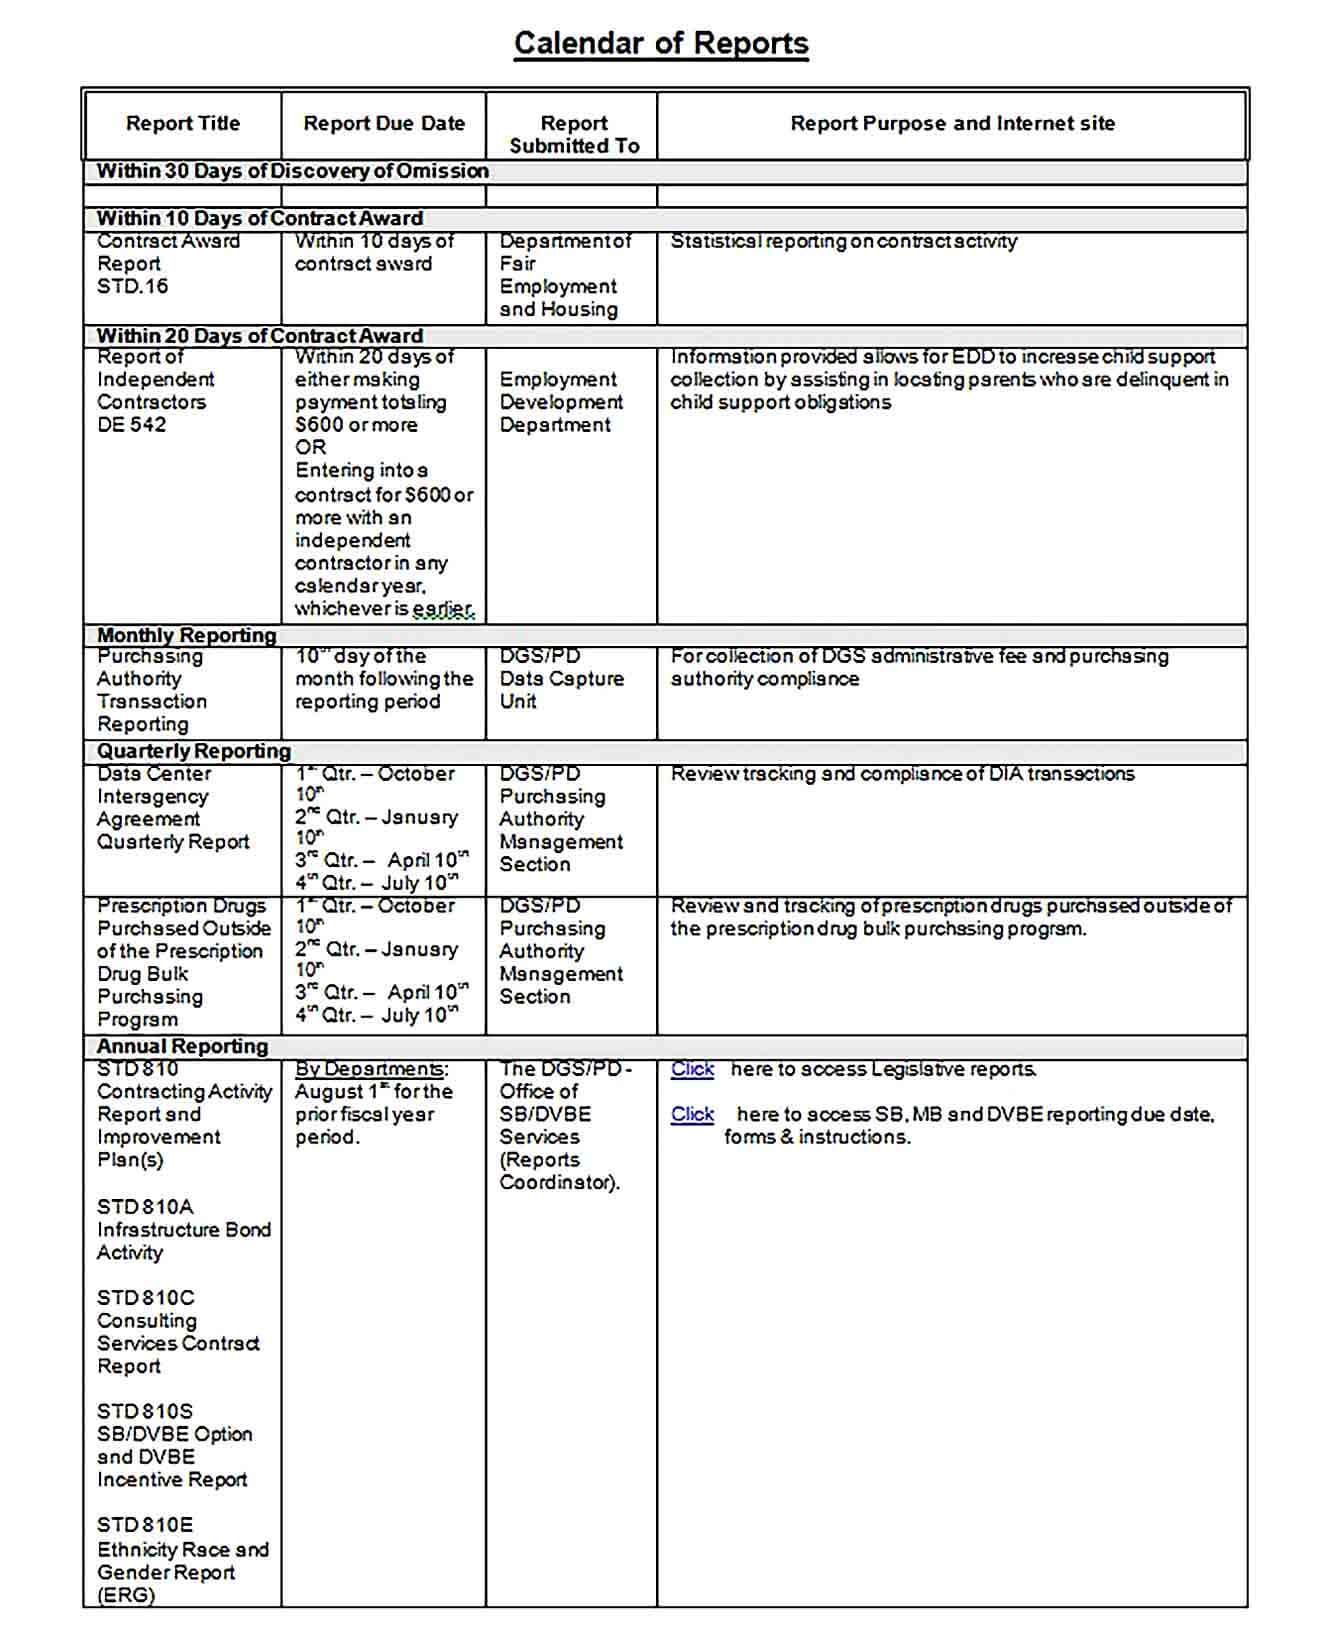 Sample MS Access Report Template1